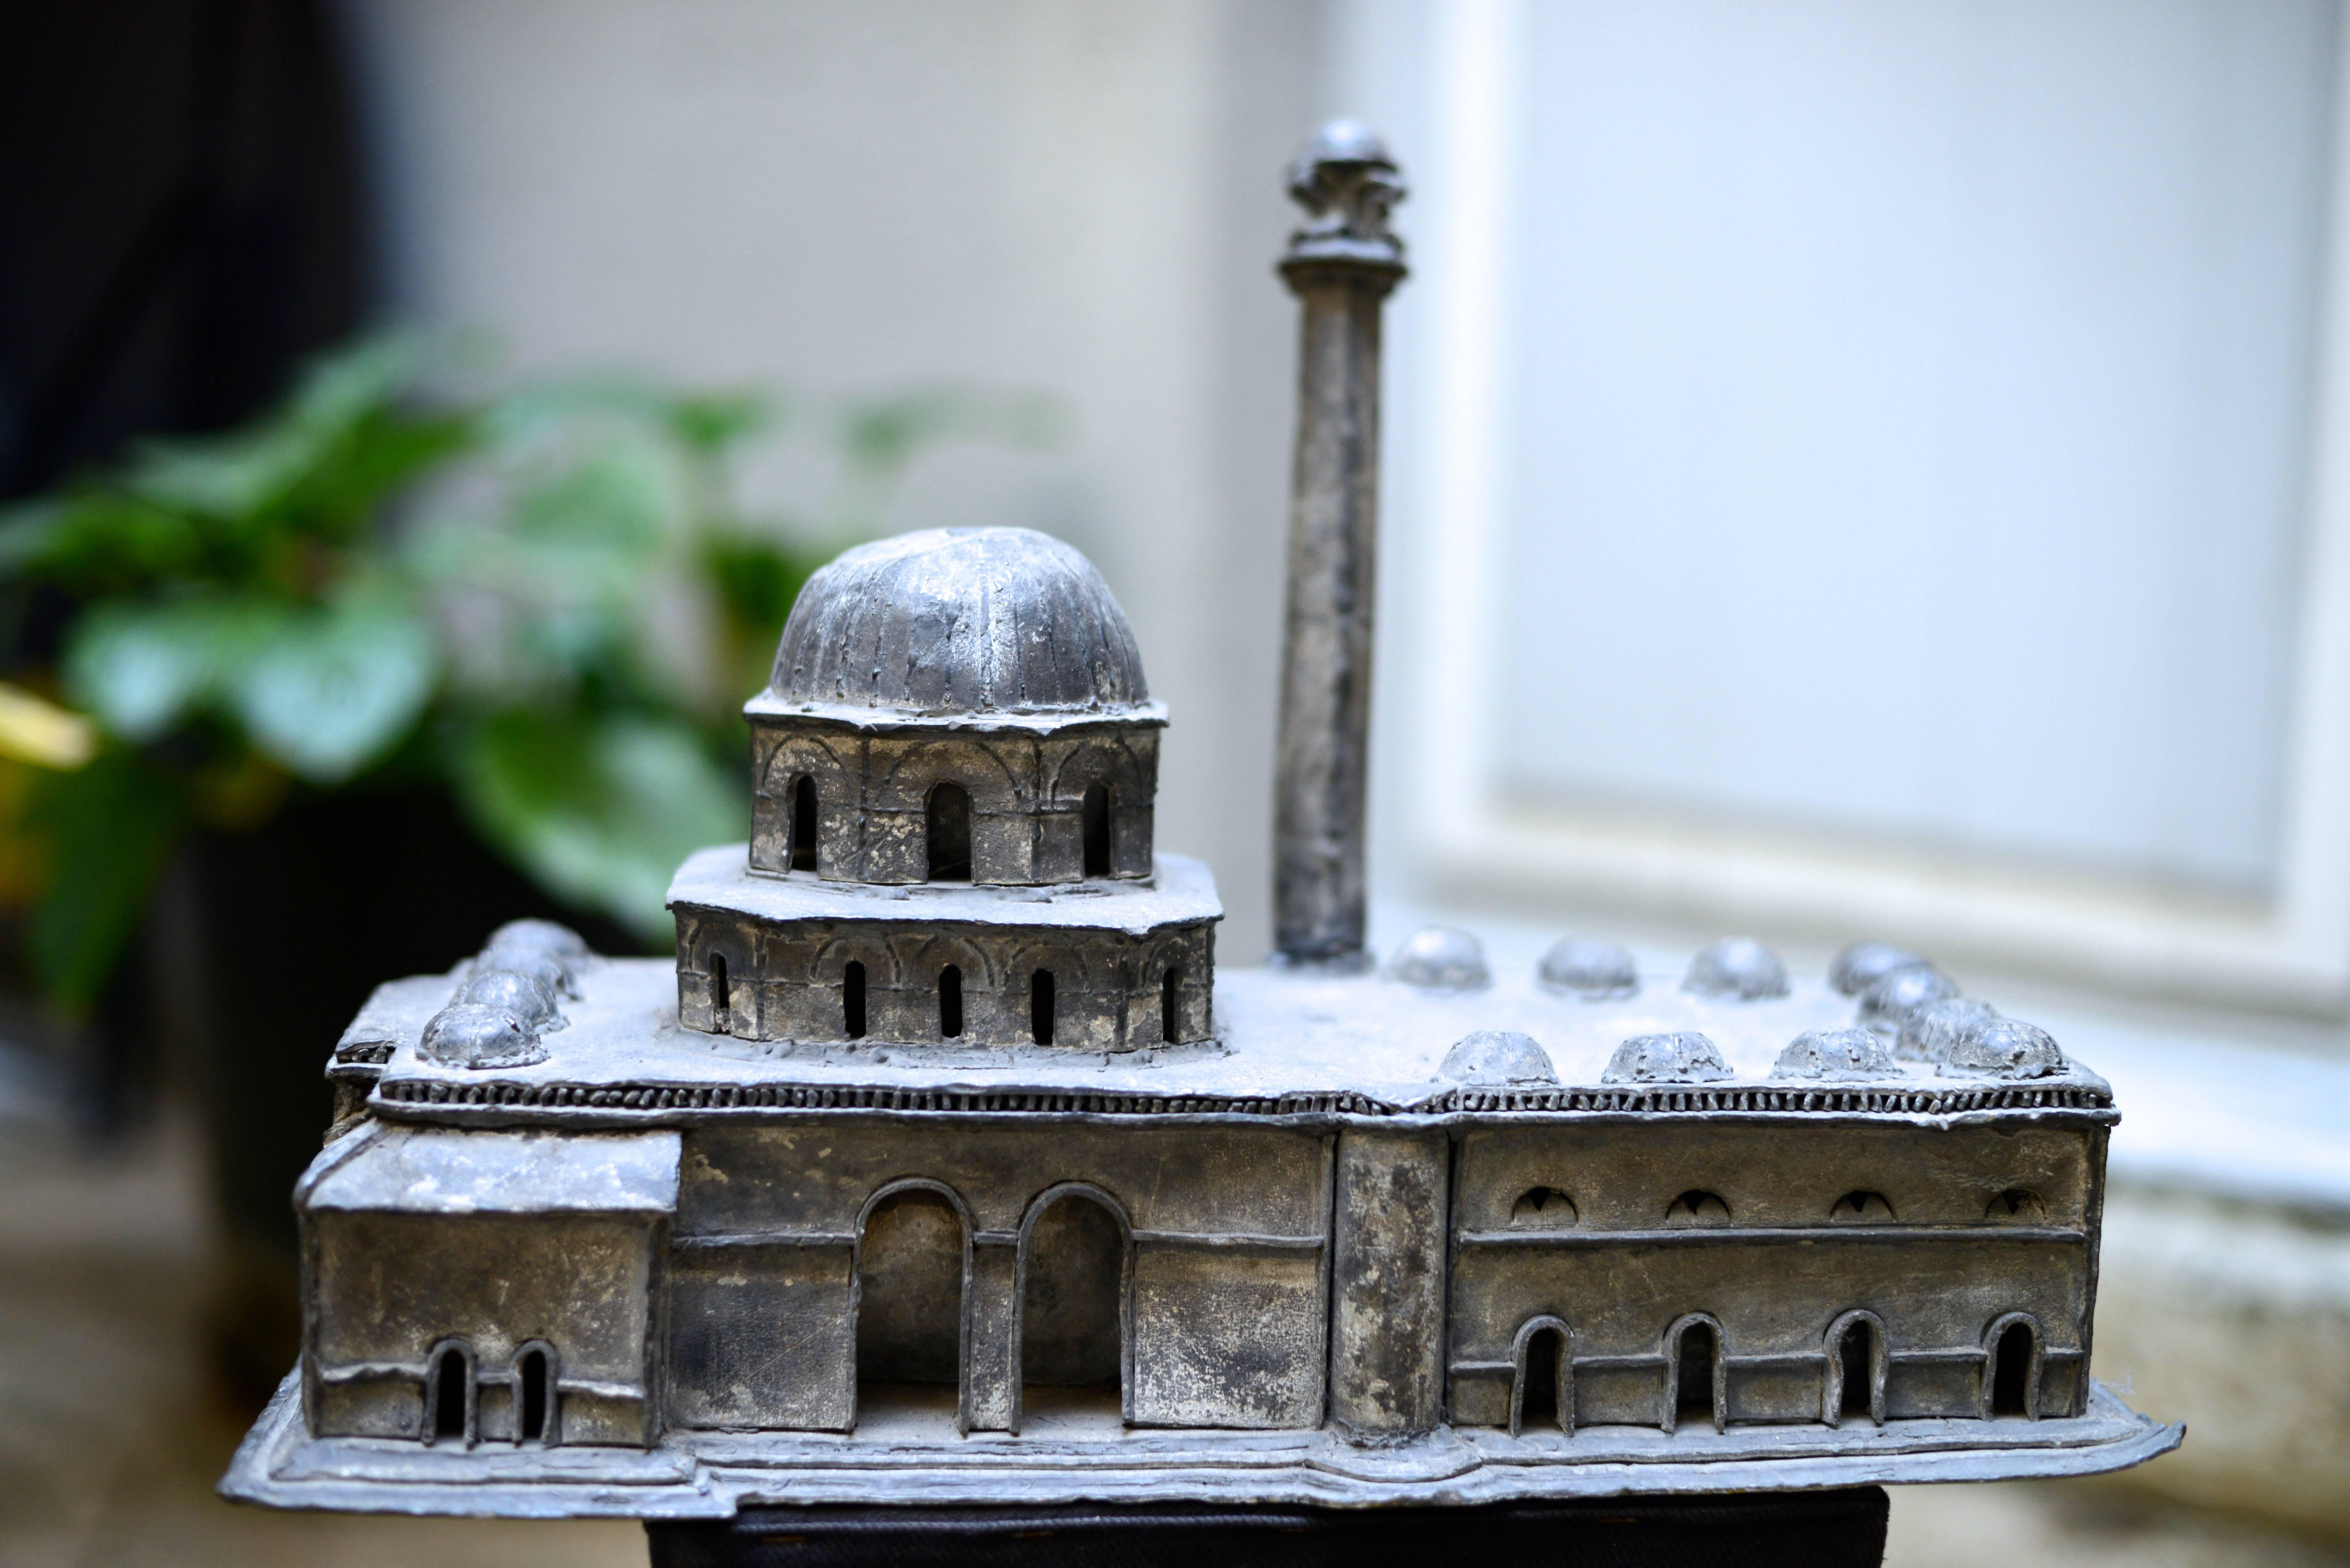 Amazing model made in lead - evoking a Middle East mosque - the building opening with several arched doors - on top, step dome and minaret. 
Tunisia, 19th century 
Dimensions: L 42.5 X W 20.5 X H 32 cm.